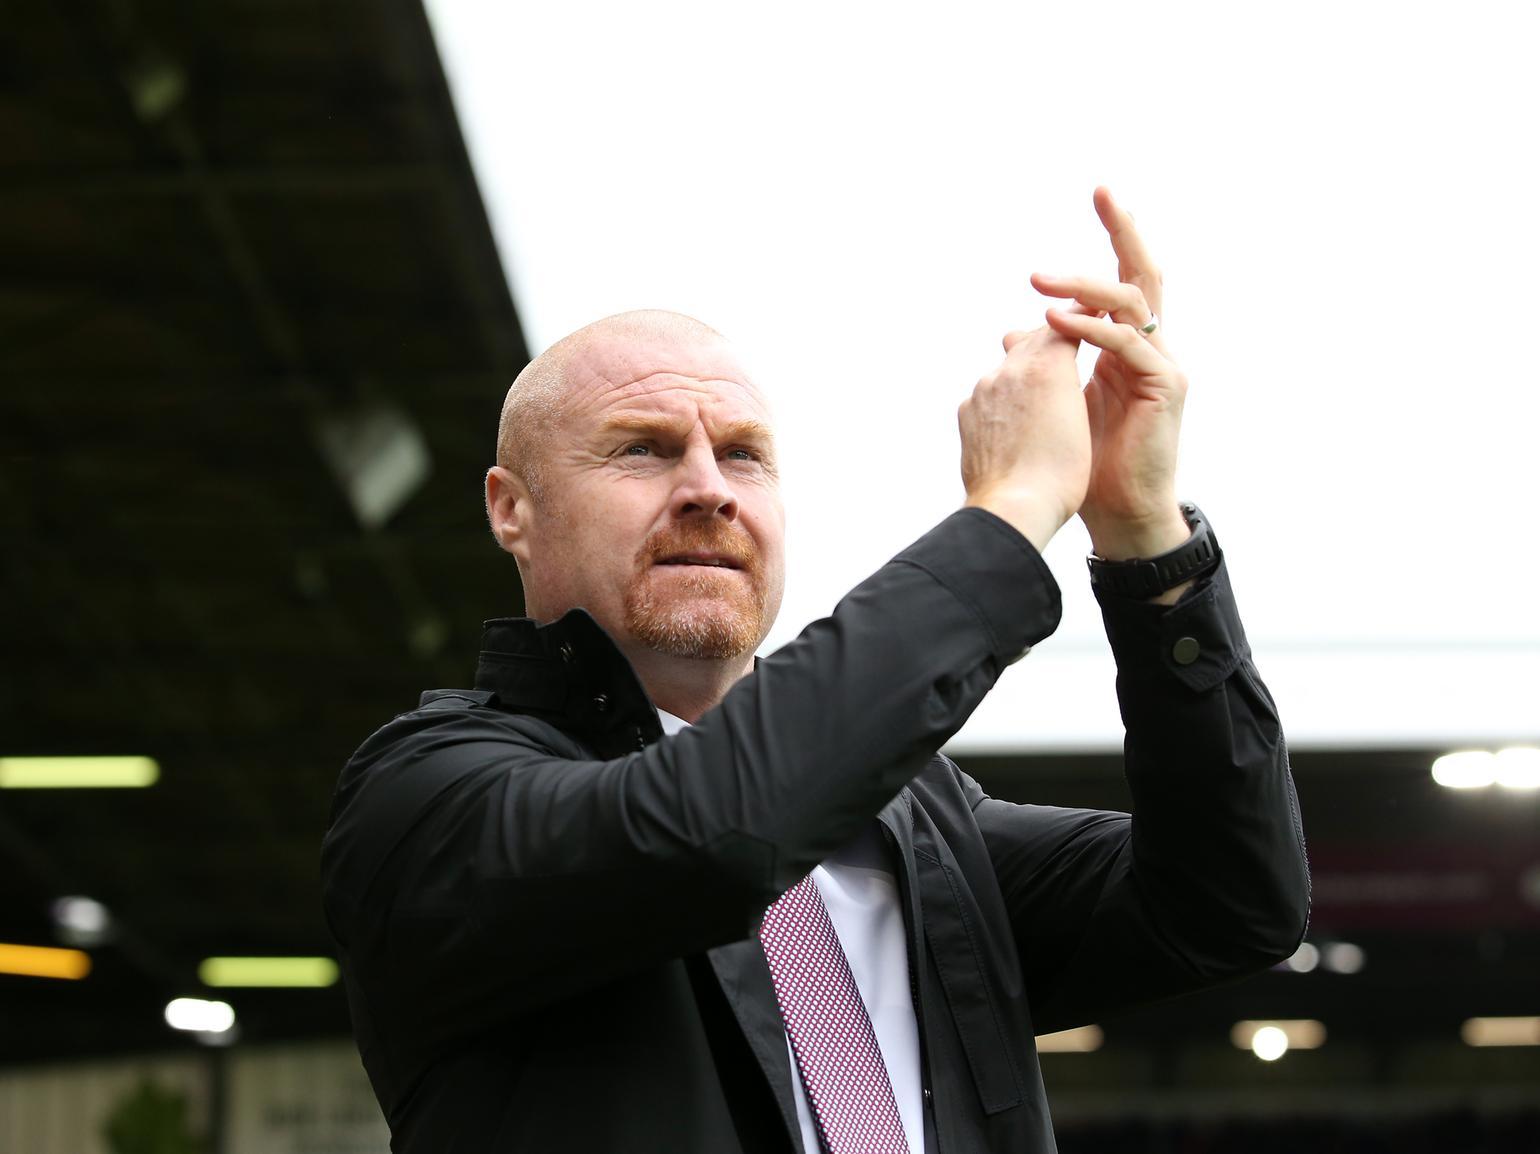 The Burnley boss has worked miracles during his seven-year spell at Turf Moor and the Clarets continue to grow from strength to strength. Victory over West Ham lifted the club in to mid-table.